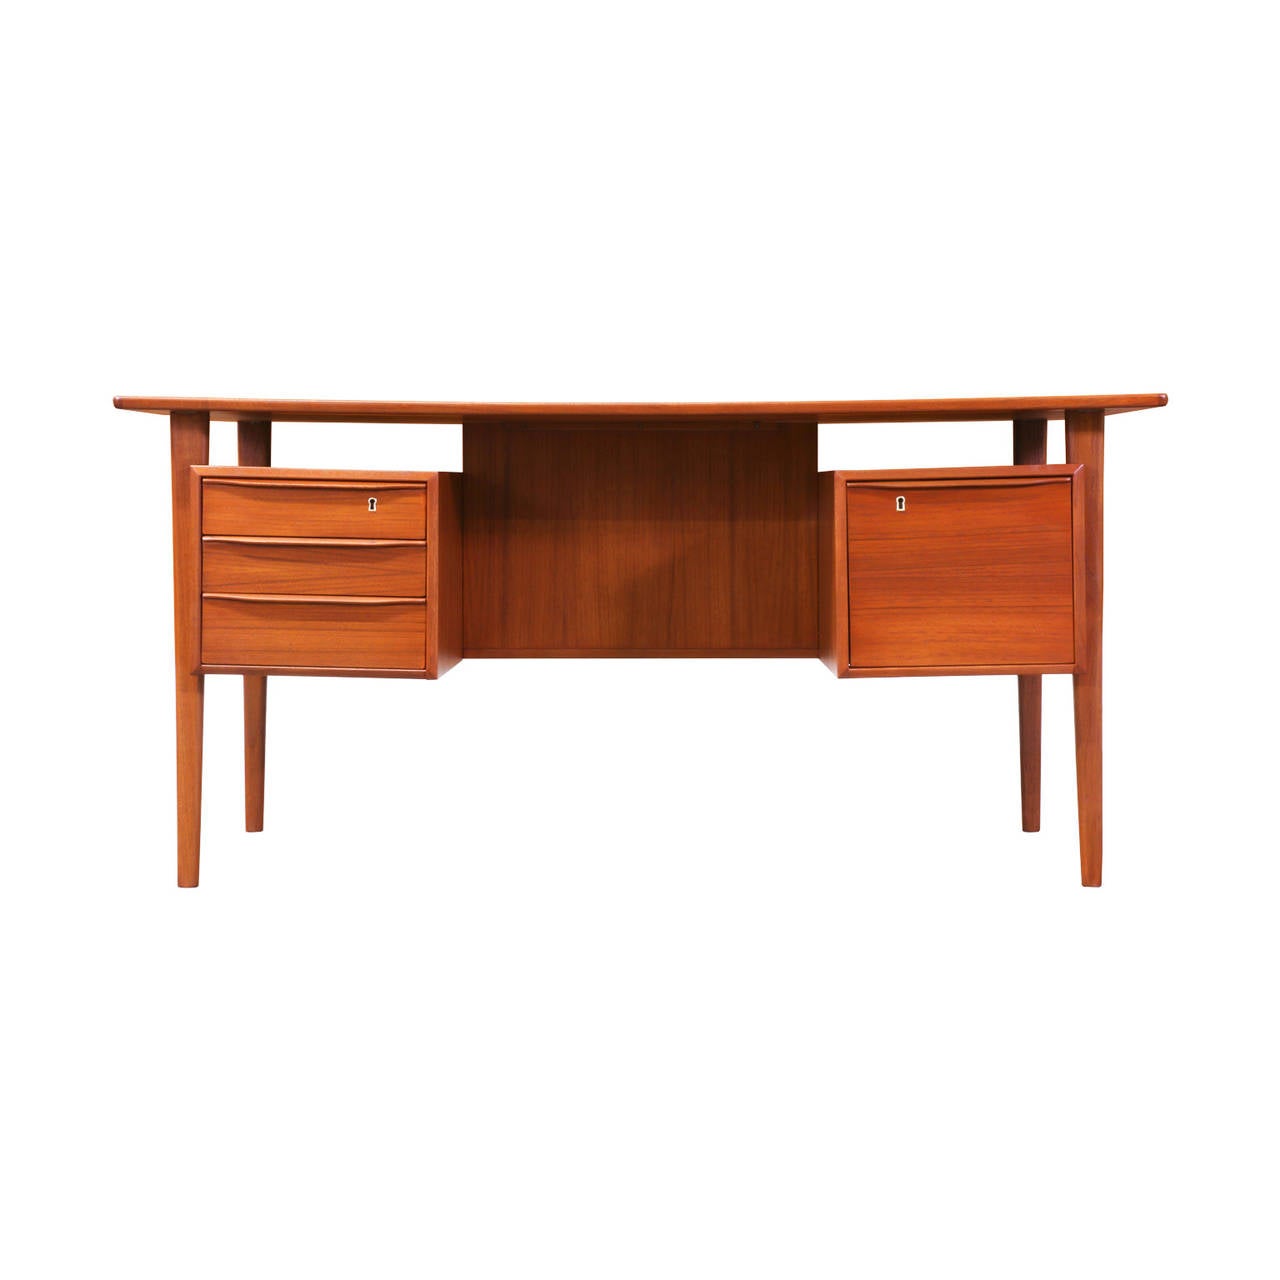 Designer: Peter Løvig Nielsen.
Manufacturer: Lovig Dansk.
Period/Style: Danish modern.
Country: Denmark.
Date: 1970s.

Dimensions: 29.5″ H x 60.75″ L x 27.75″ W.
Materials: Teak.
Condition: Excellent, newly refinished.
Number of items: